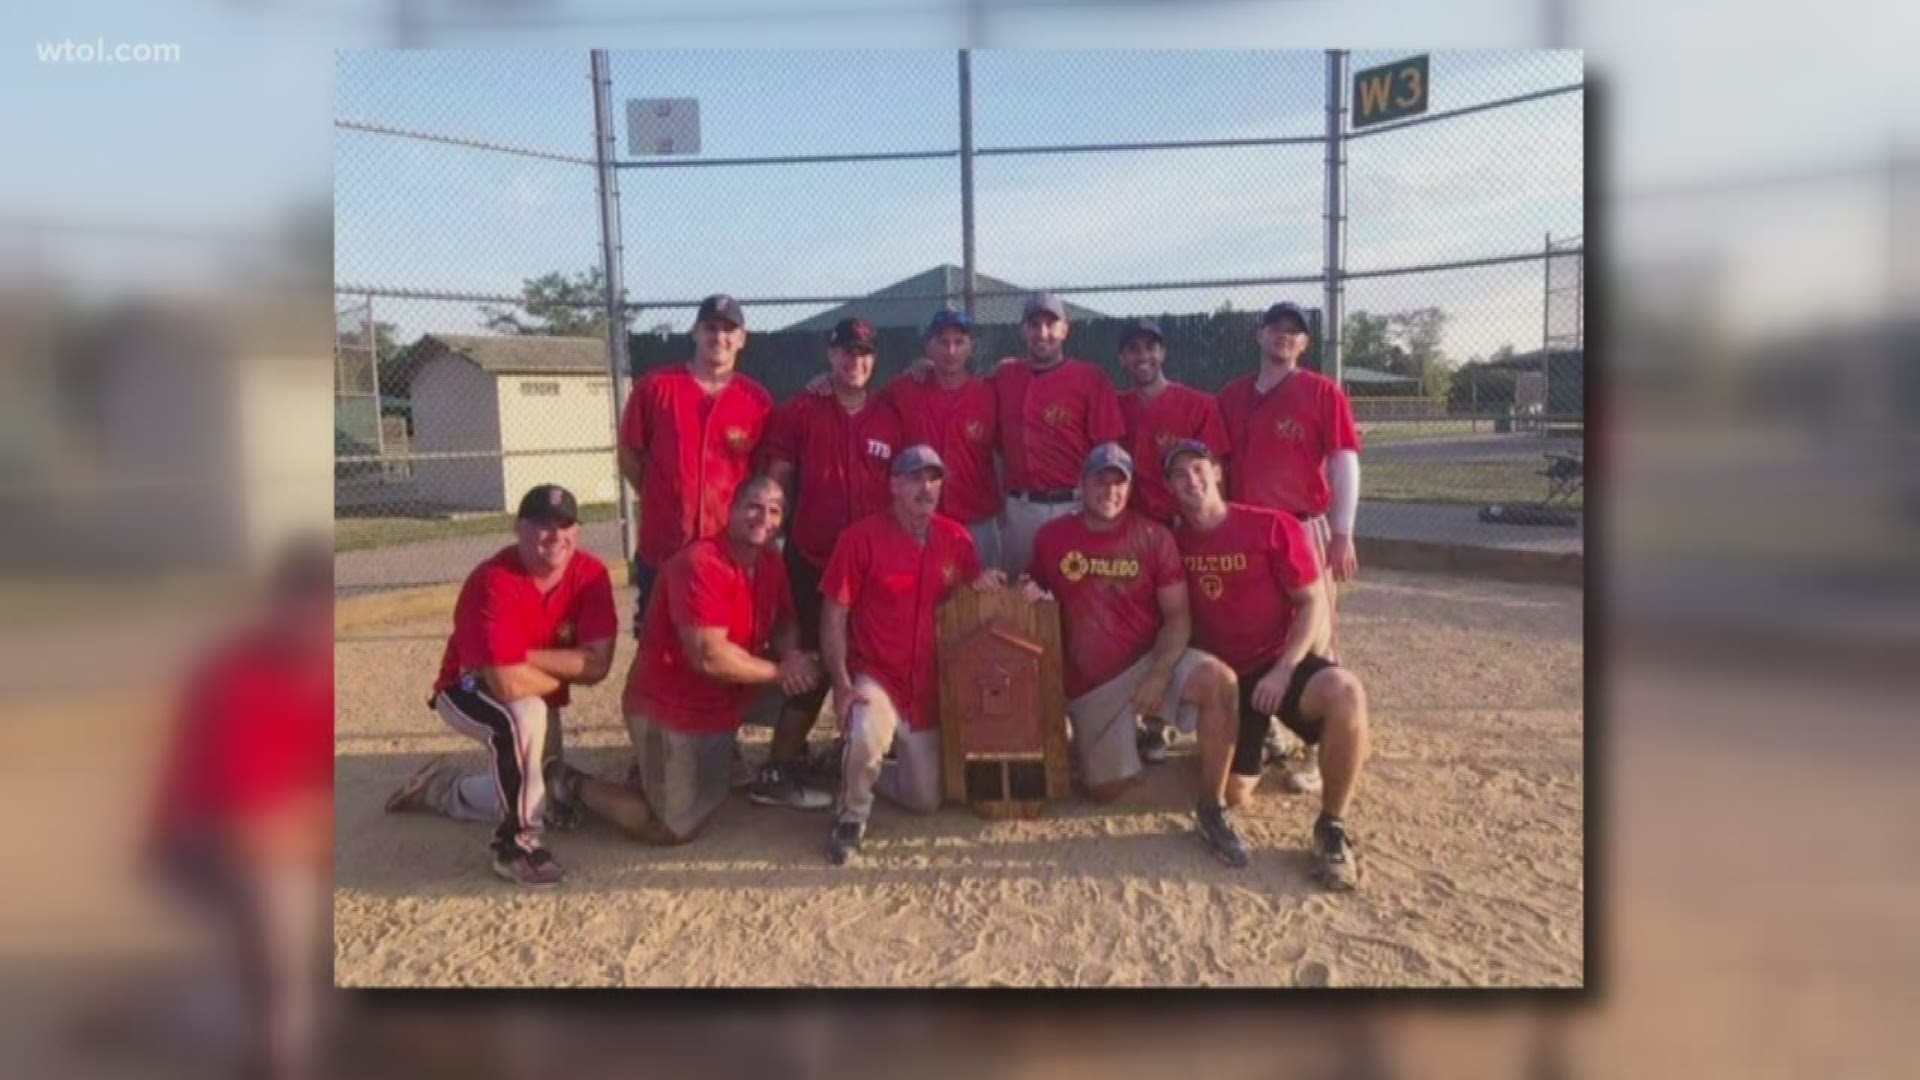 The Toledo Fire and Rescue department sent two teams down to the State Firefighter Softball Tournament in Grove City this weekend. Sunday, the “A” team beat Cincinnati Fire 10-2 to win a state title.